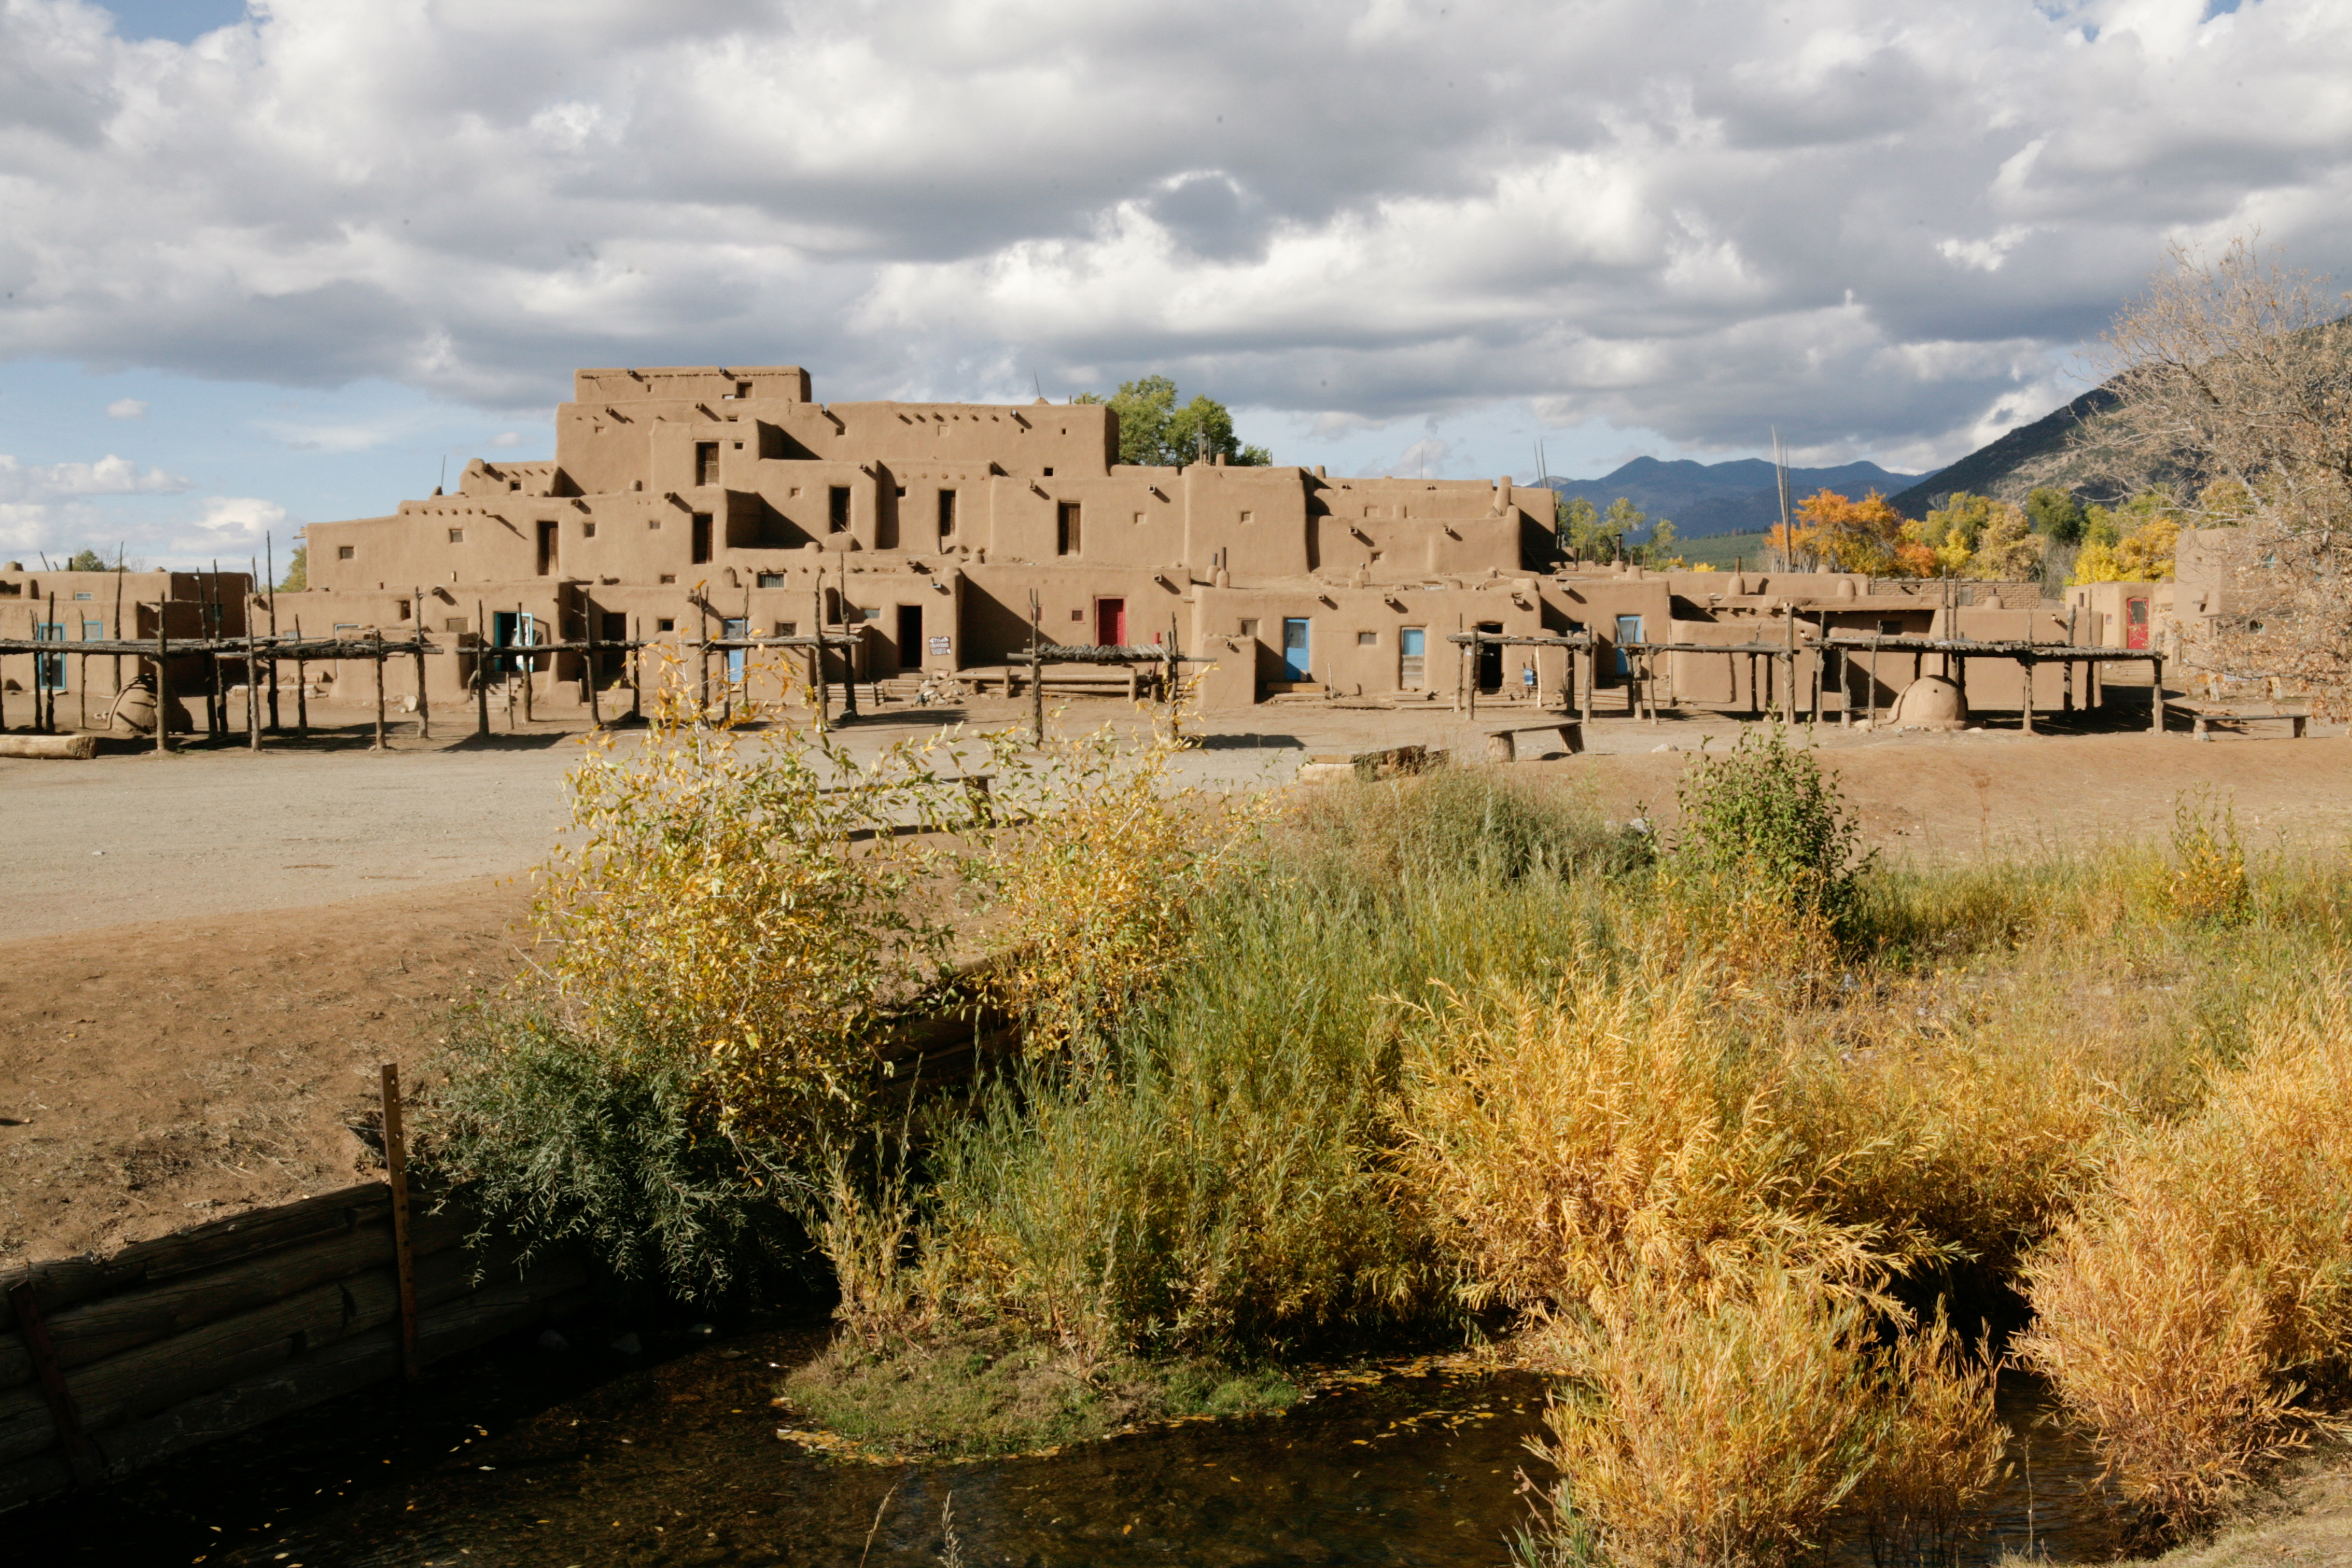 Documenting PBS while they Document Taos Pueblo